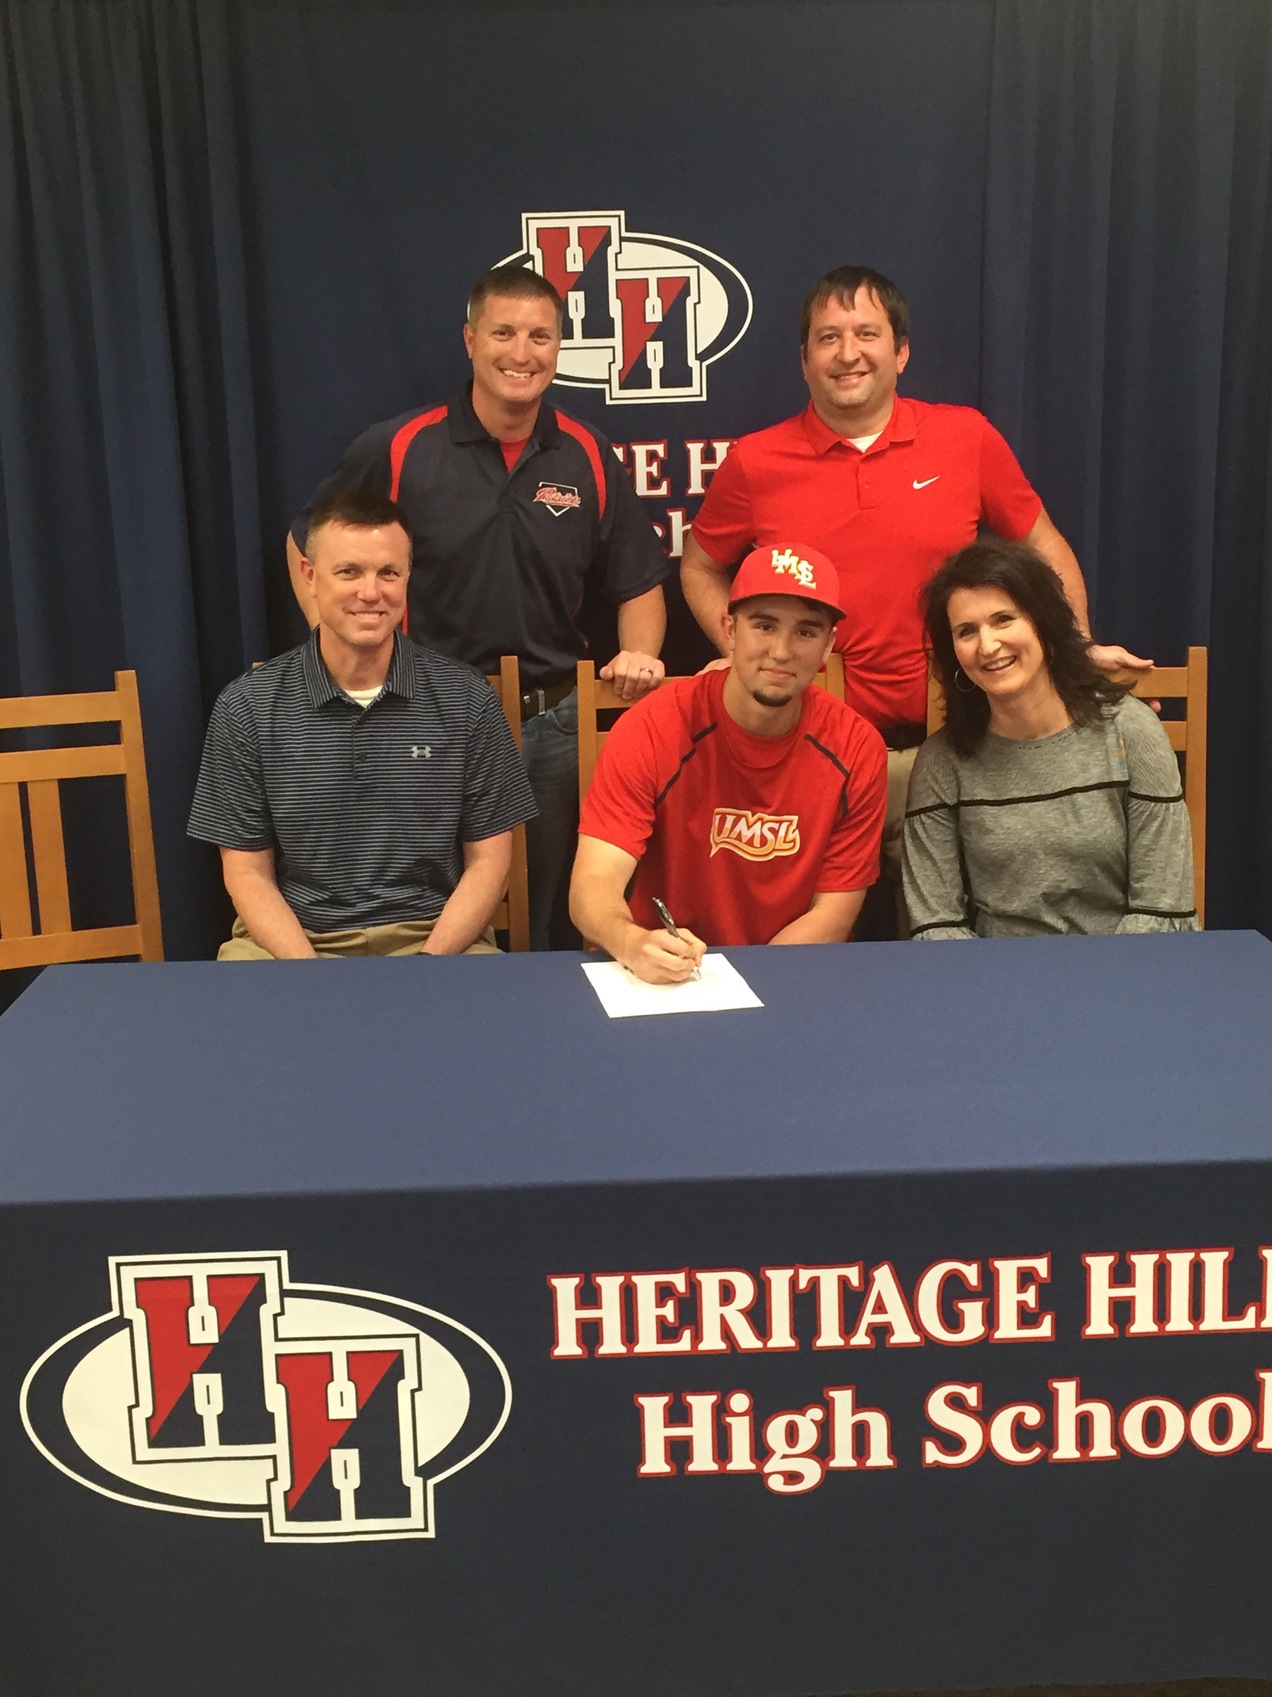 Mitchel Becher Signs to Play College Baseball at UMSL